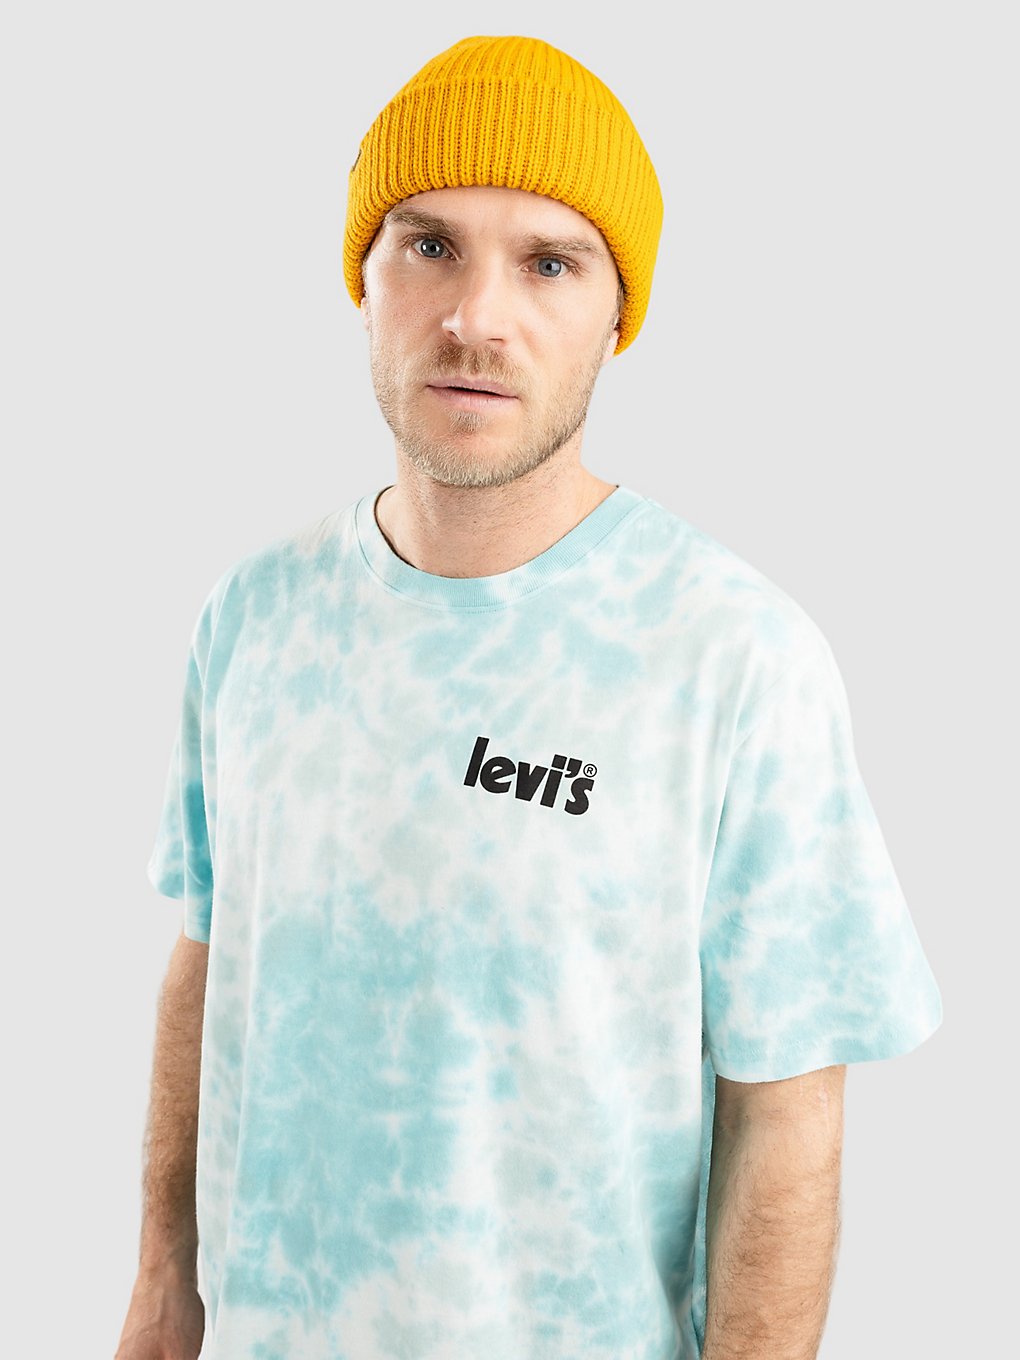 Levi's Relaxed Fit Reds T-Shirt poster blue dye kaufen